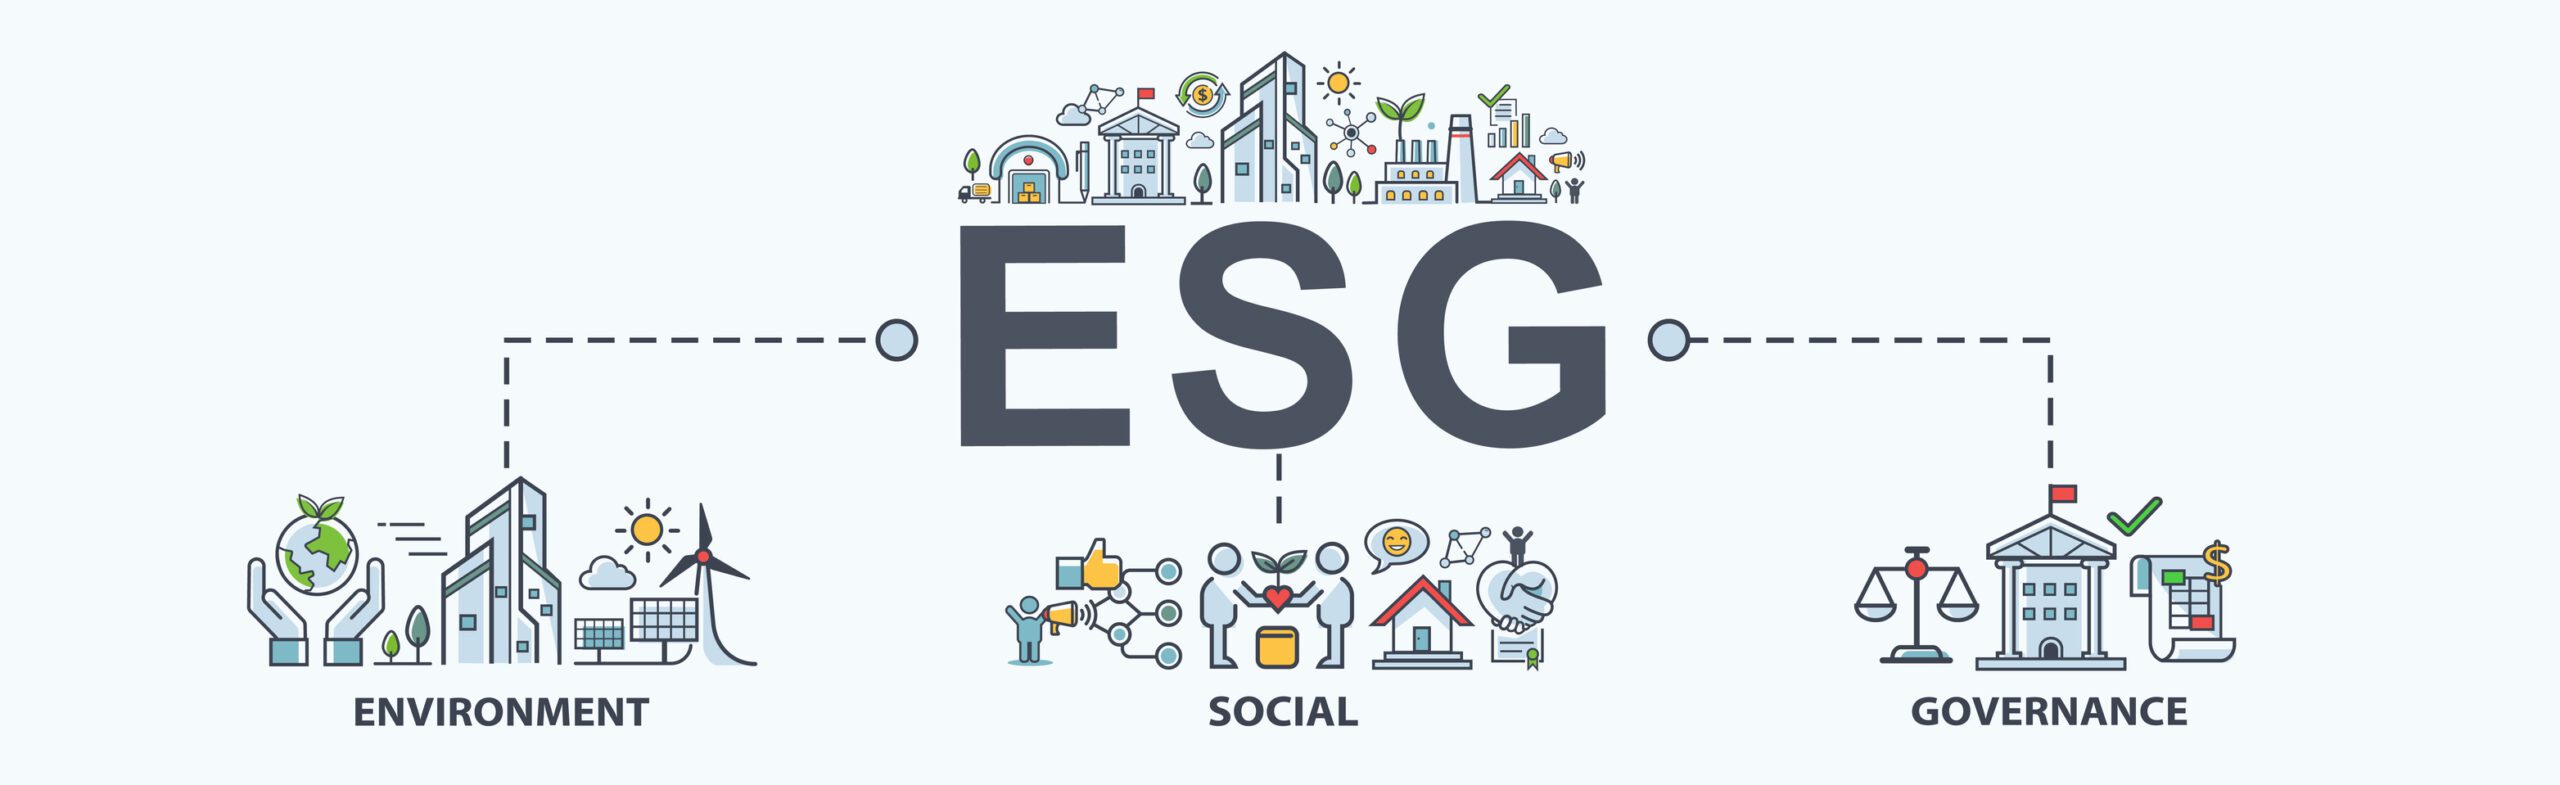 Infographic of environment, social, and governance (ESG) investment